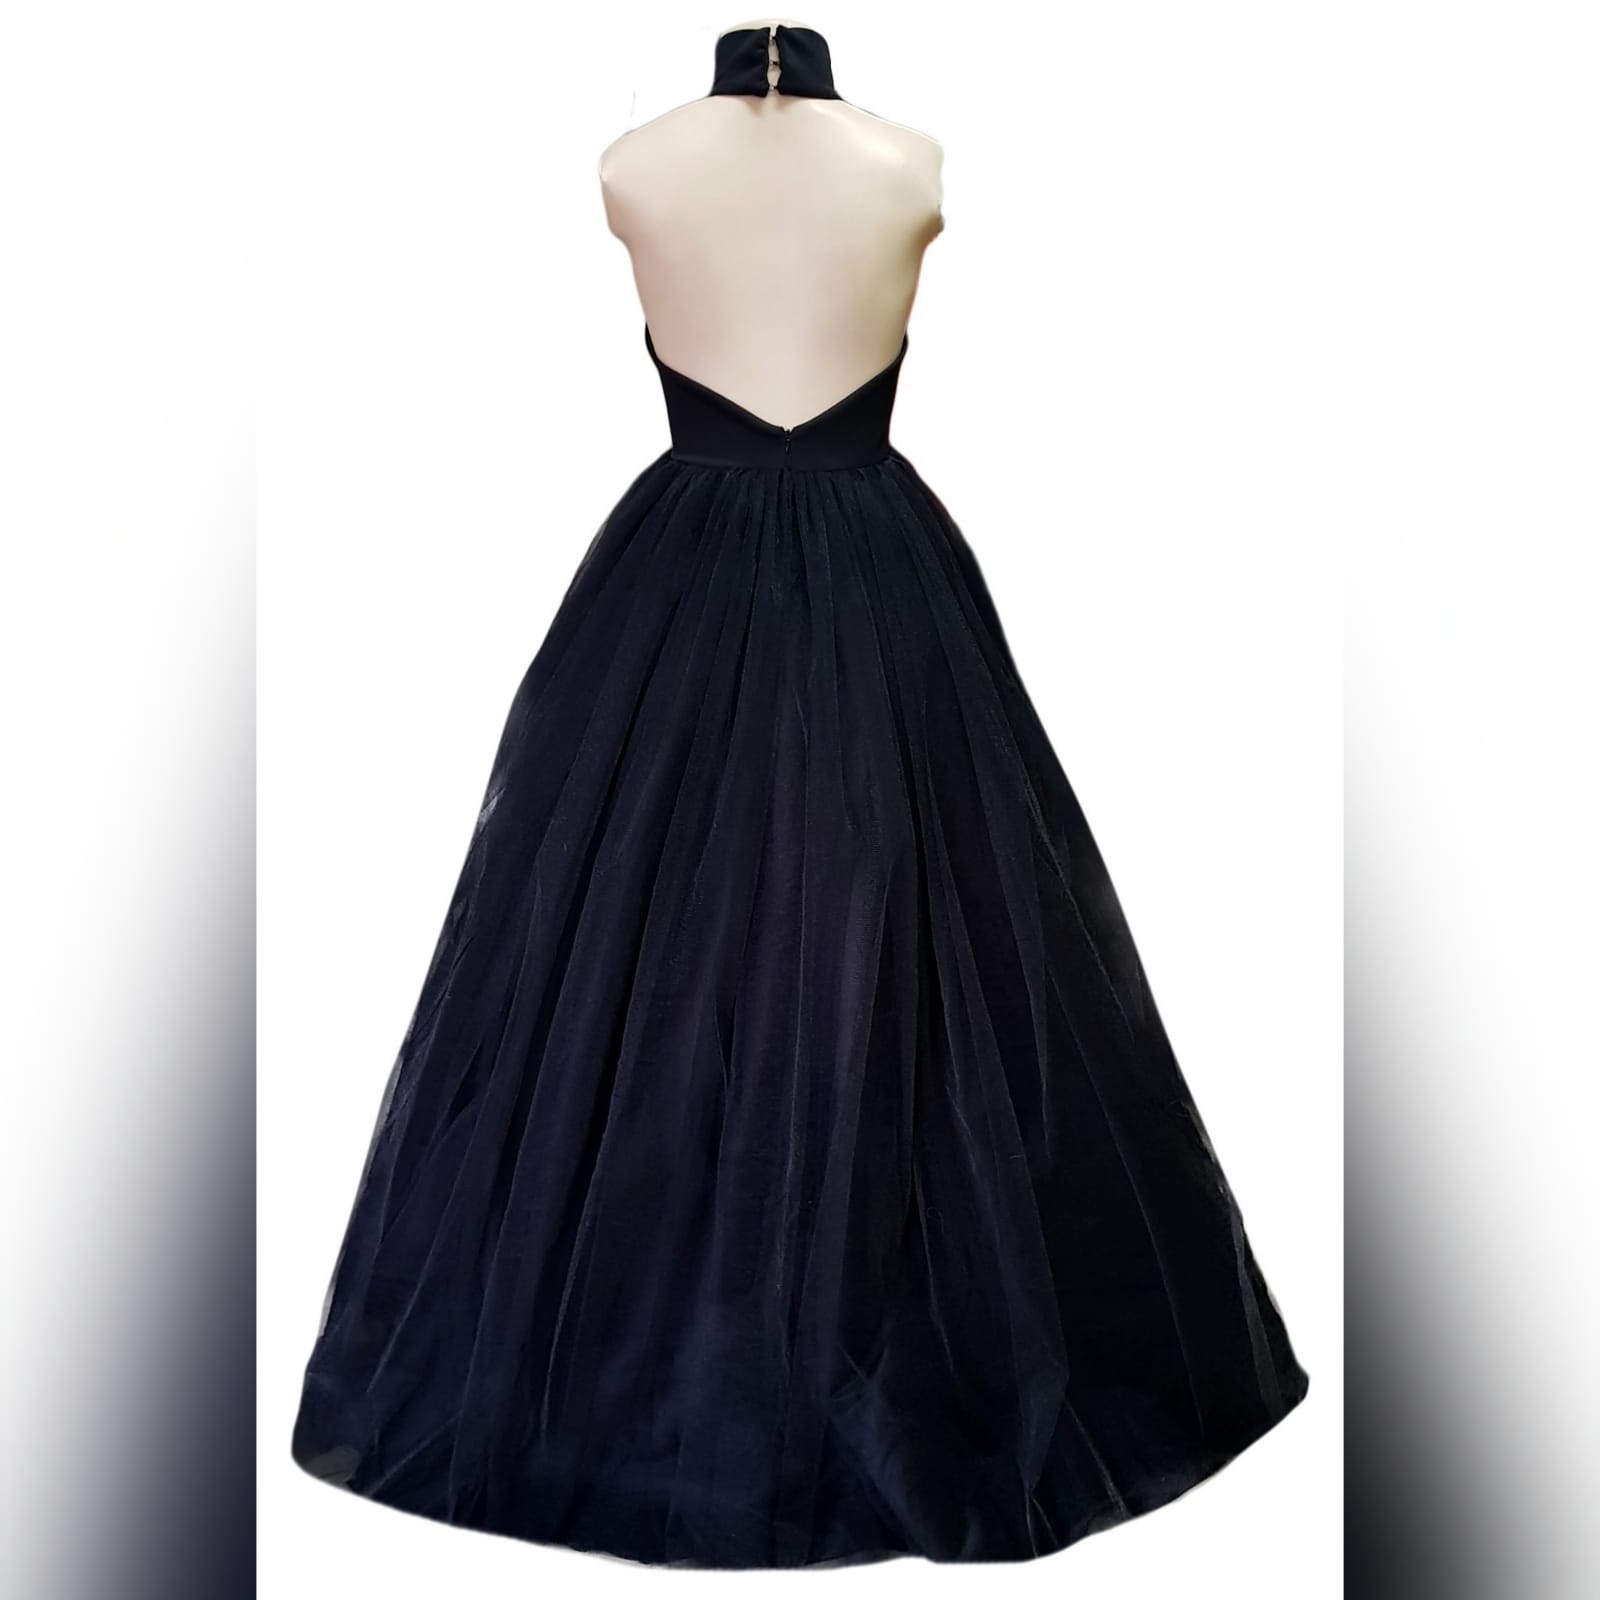 Black tulle prom ball gown 5 black tulle prom ball gown with an illusion plunging neckline and choker, backless design creating a v, with a full long tulle bottom.